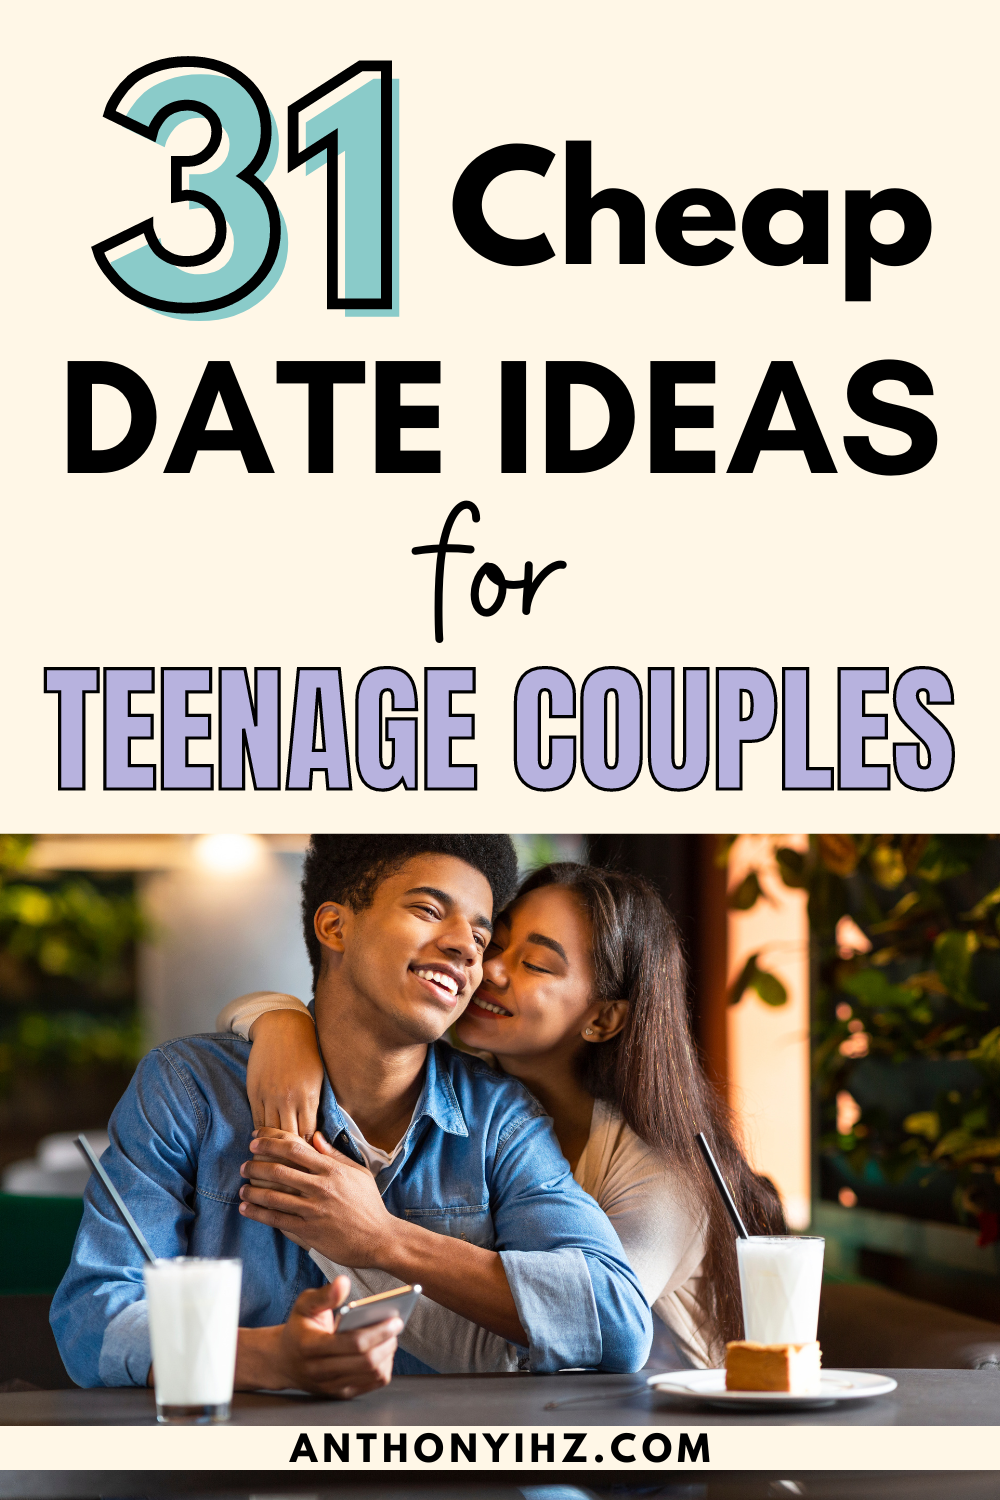 date ideas for teenage couples